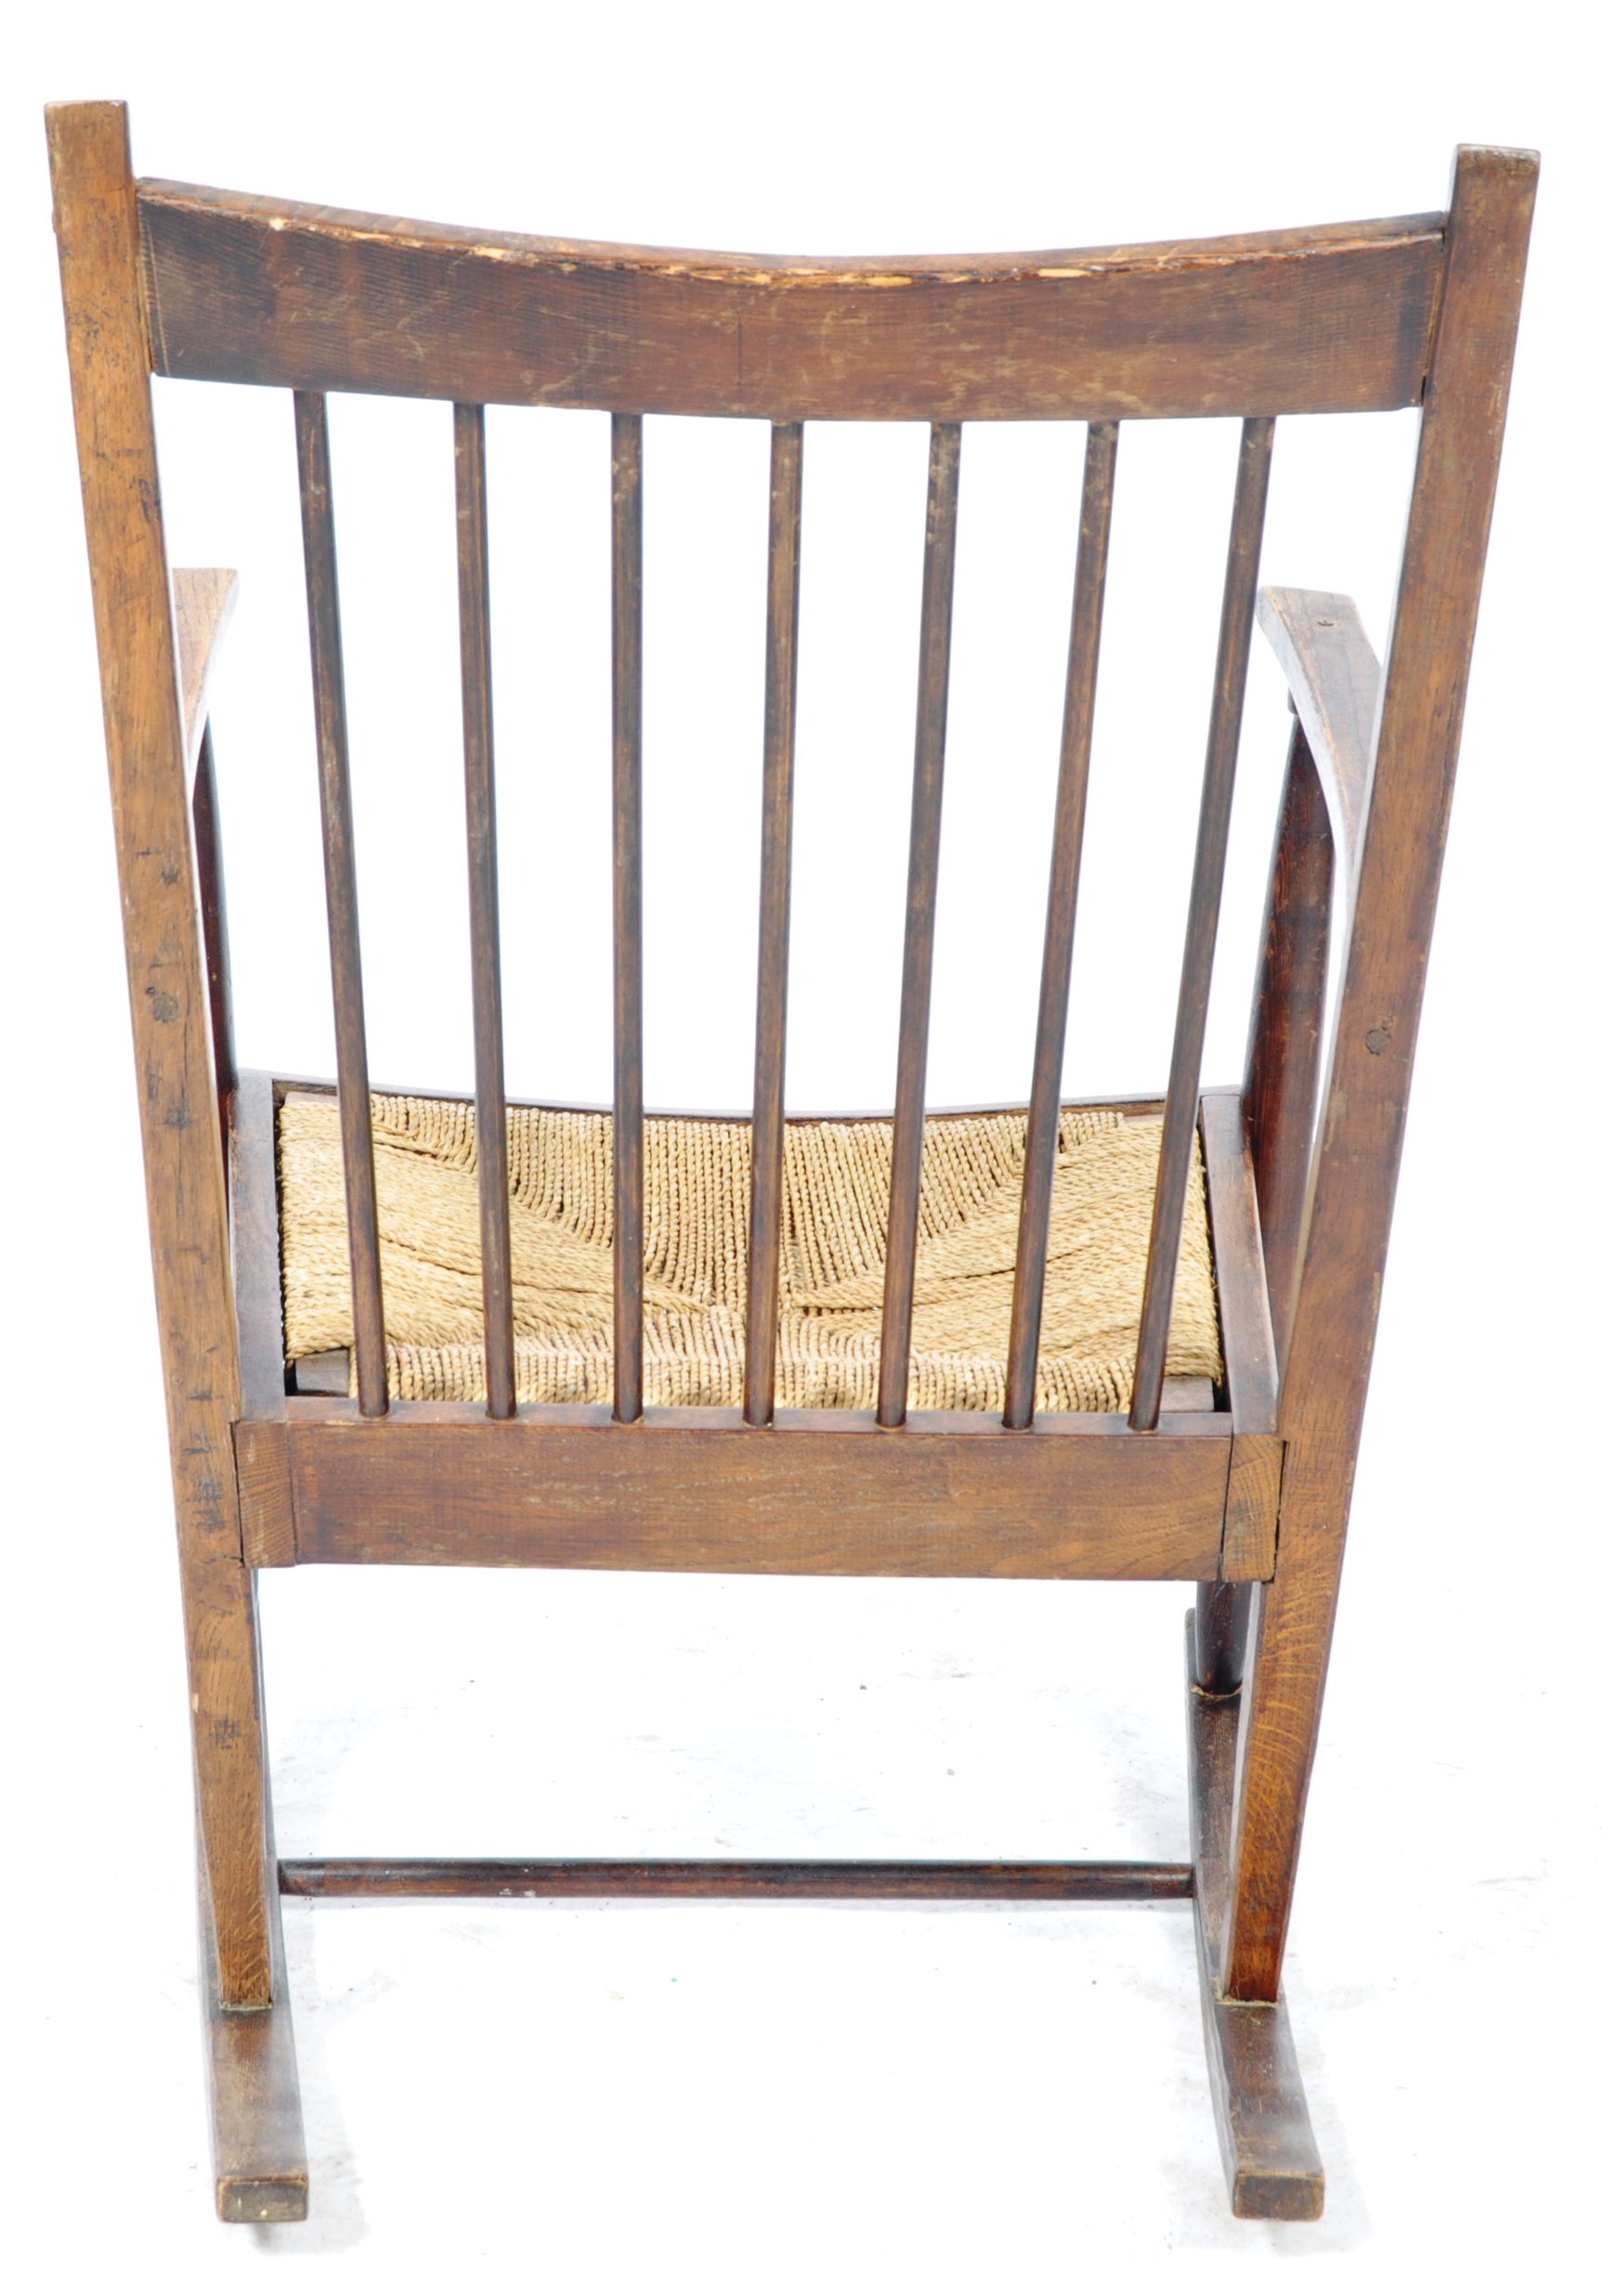 EARLY TO MID 20TH CENTURY BESPOKE MADE OAK ROCKING CHAIR - Image 5 of 5